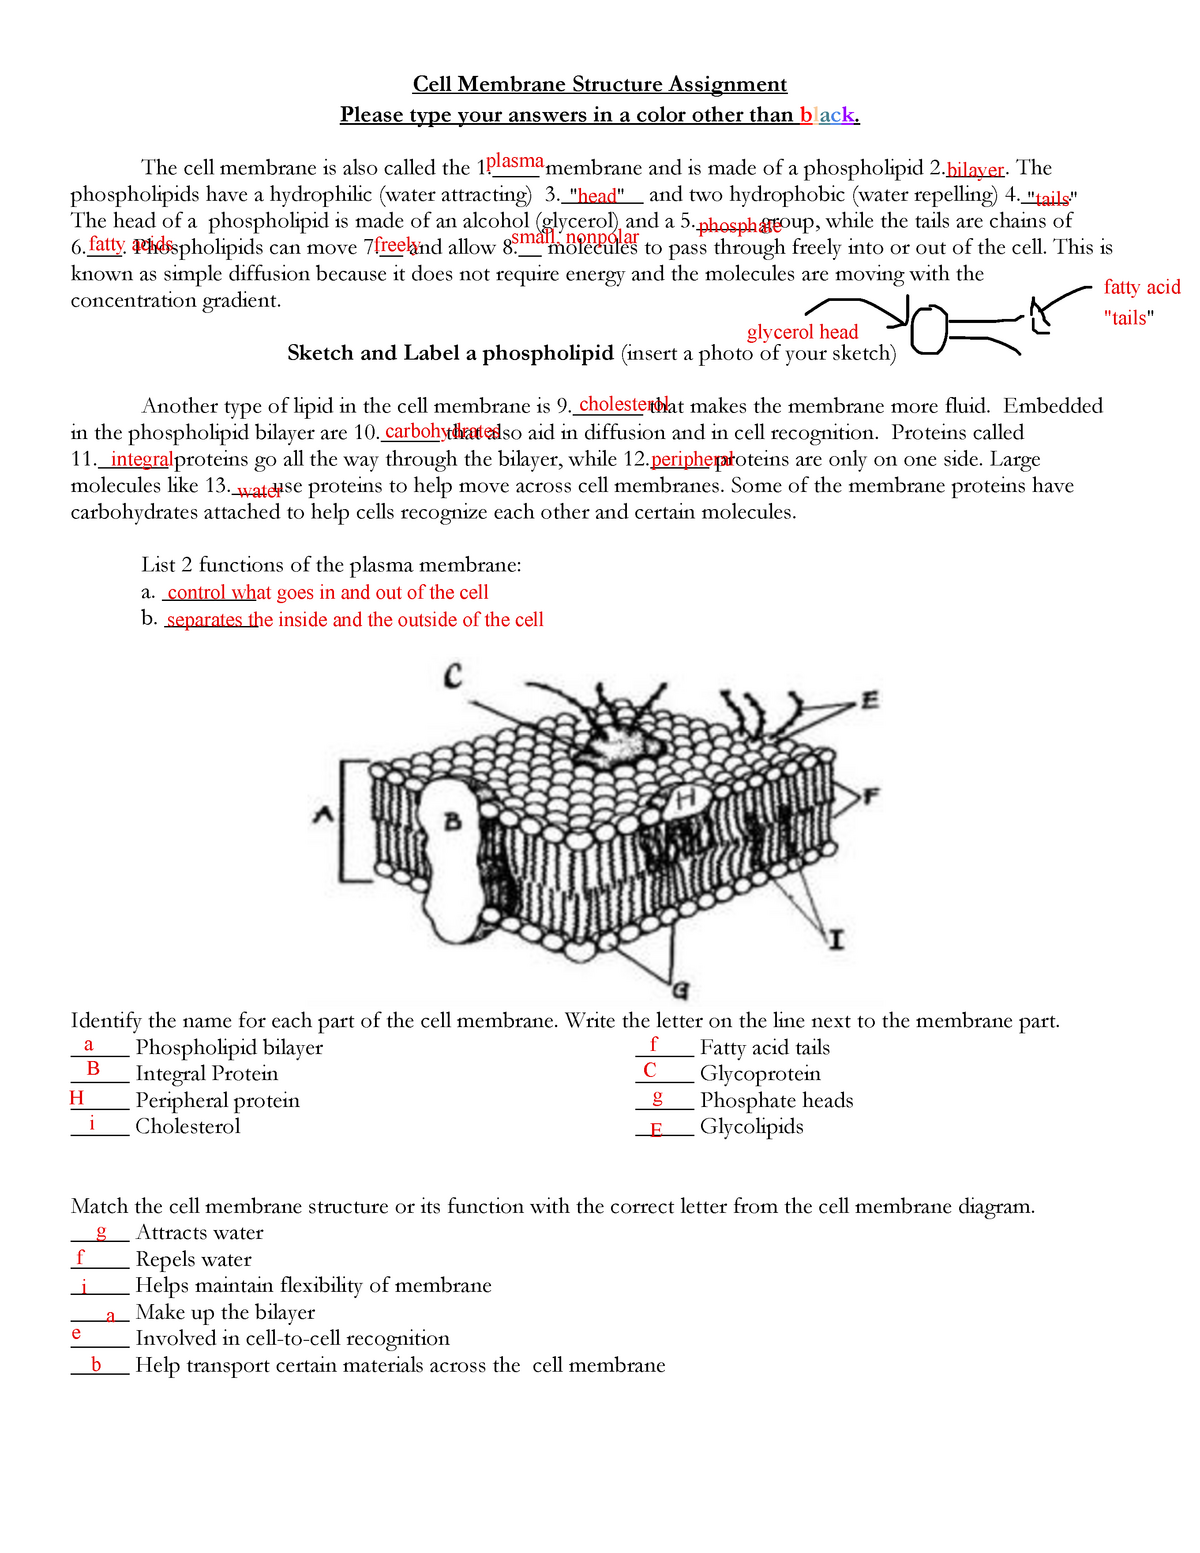 Unit 10 - Cell Membrane Assignment (Hn Bio - Falcone 10) - BIO10 With Cell Membrane Coloring Worksheet Answers